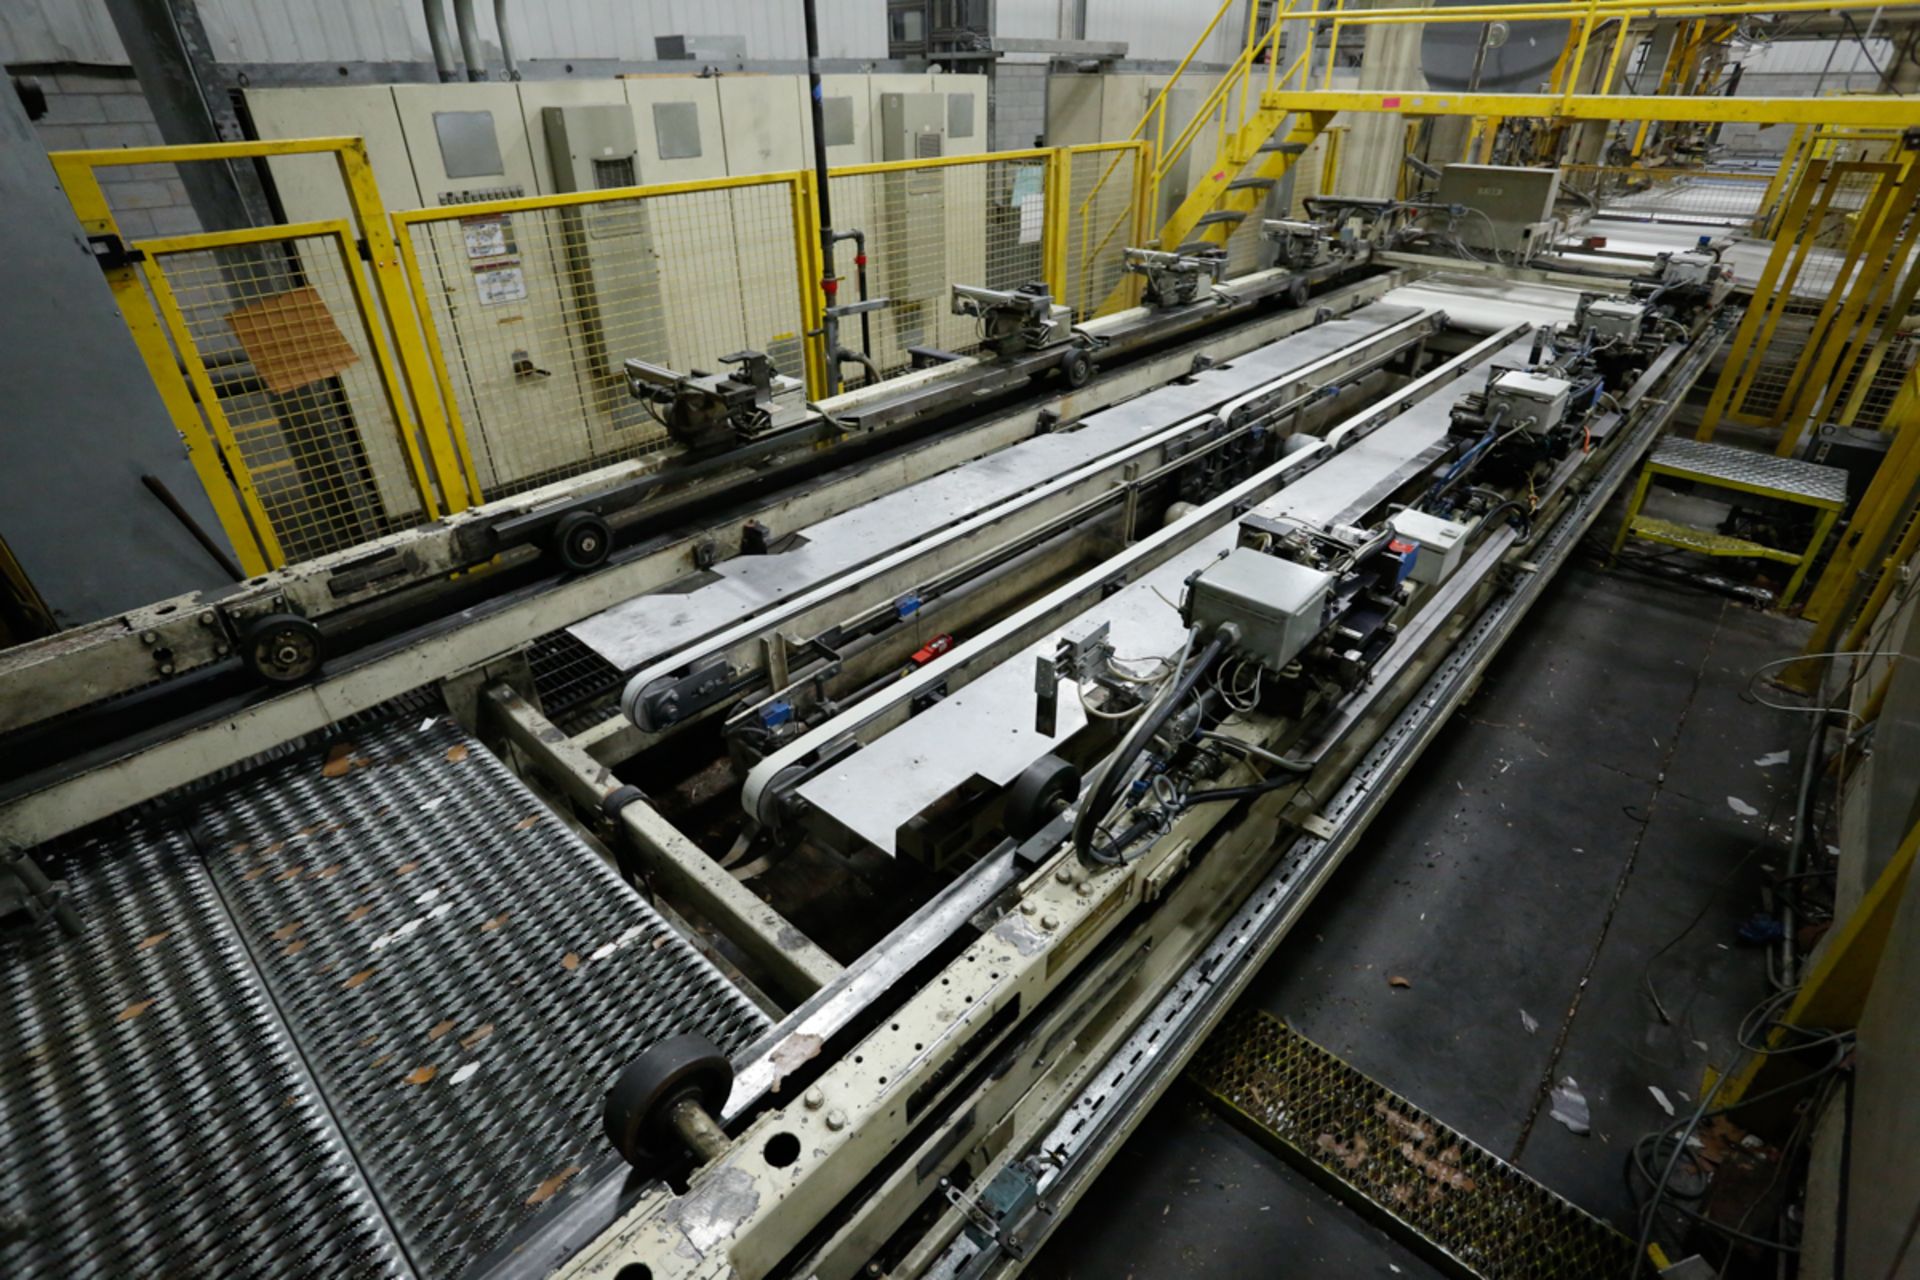 LOT OF 8 BHU - BOARD HANDLING UNITS C/W CONVEYORS (COMPRISING OF ITEM # 1.11.0 TO 1.12.8) - Image 3 of 3